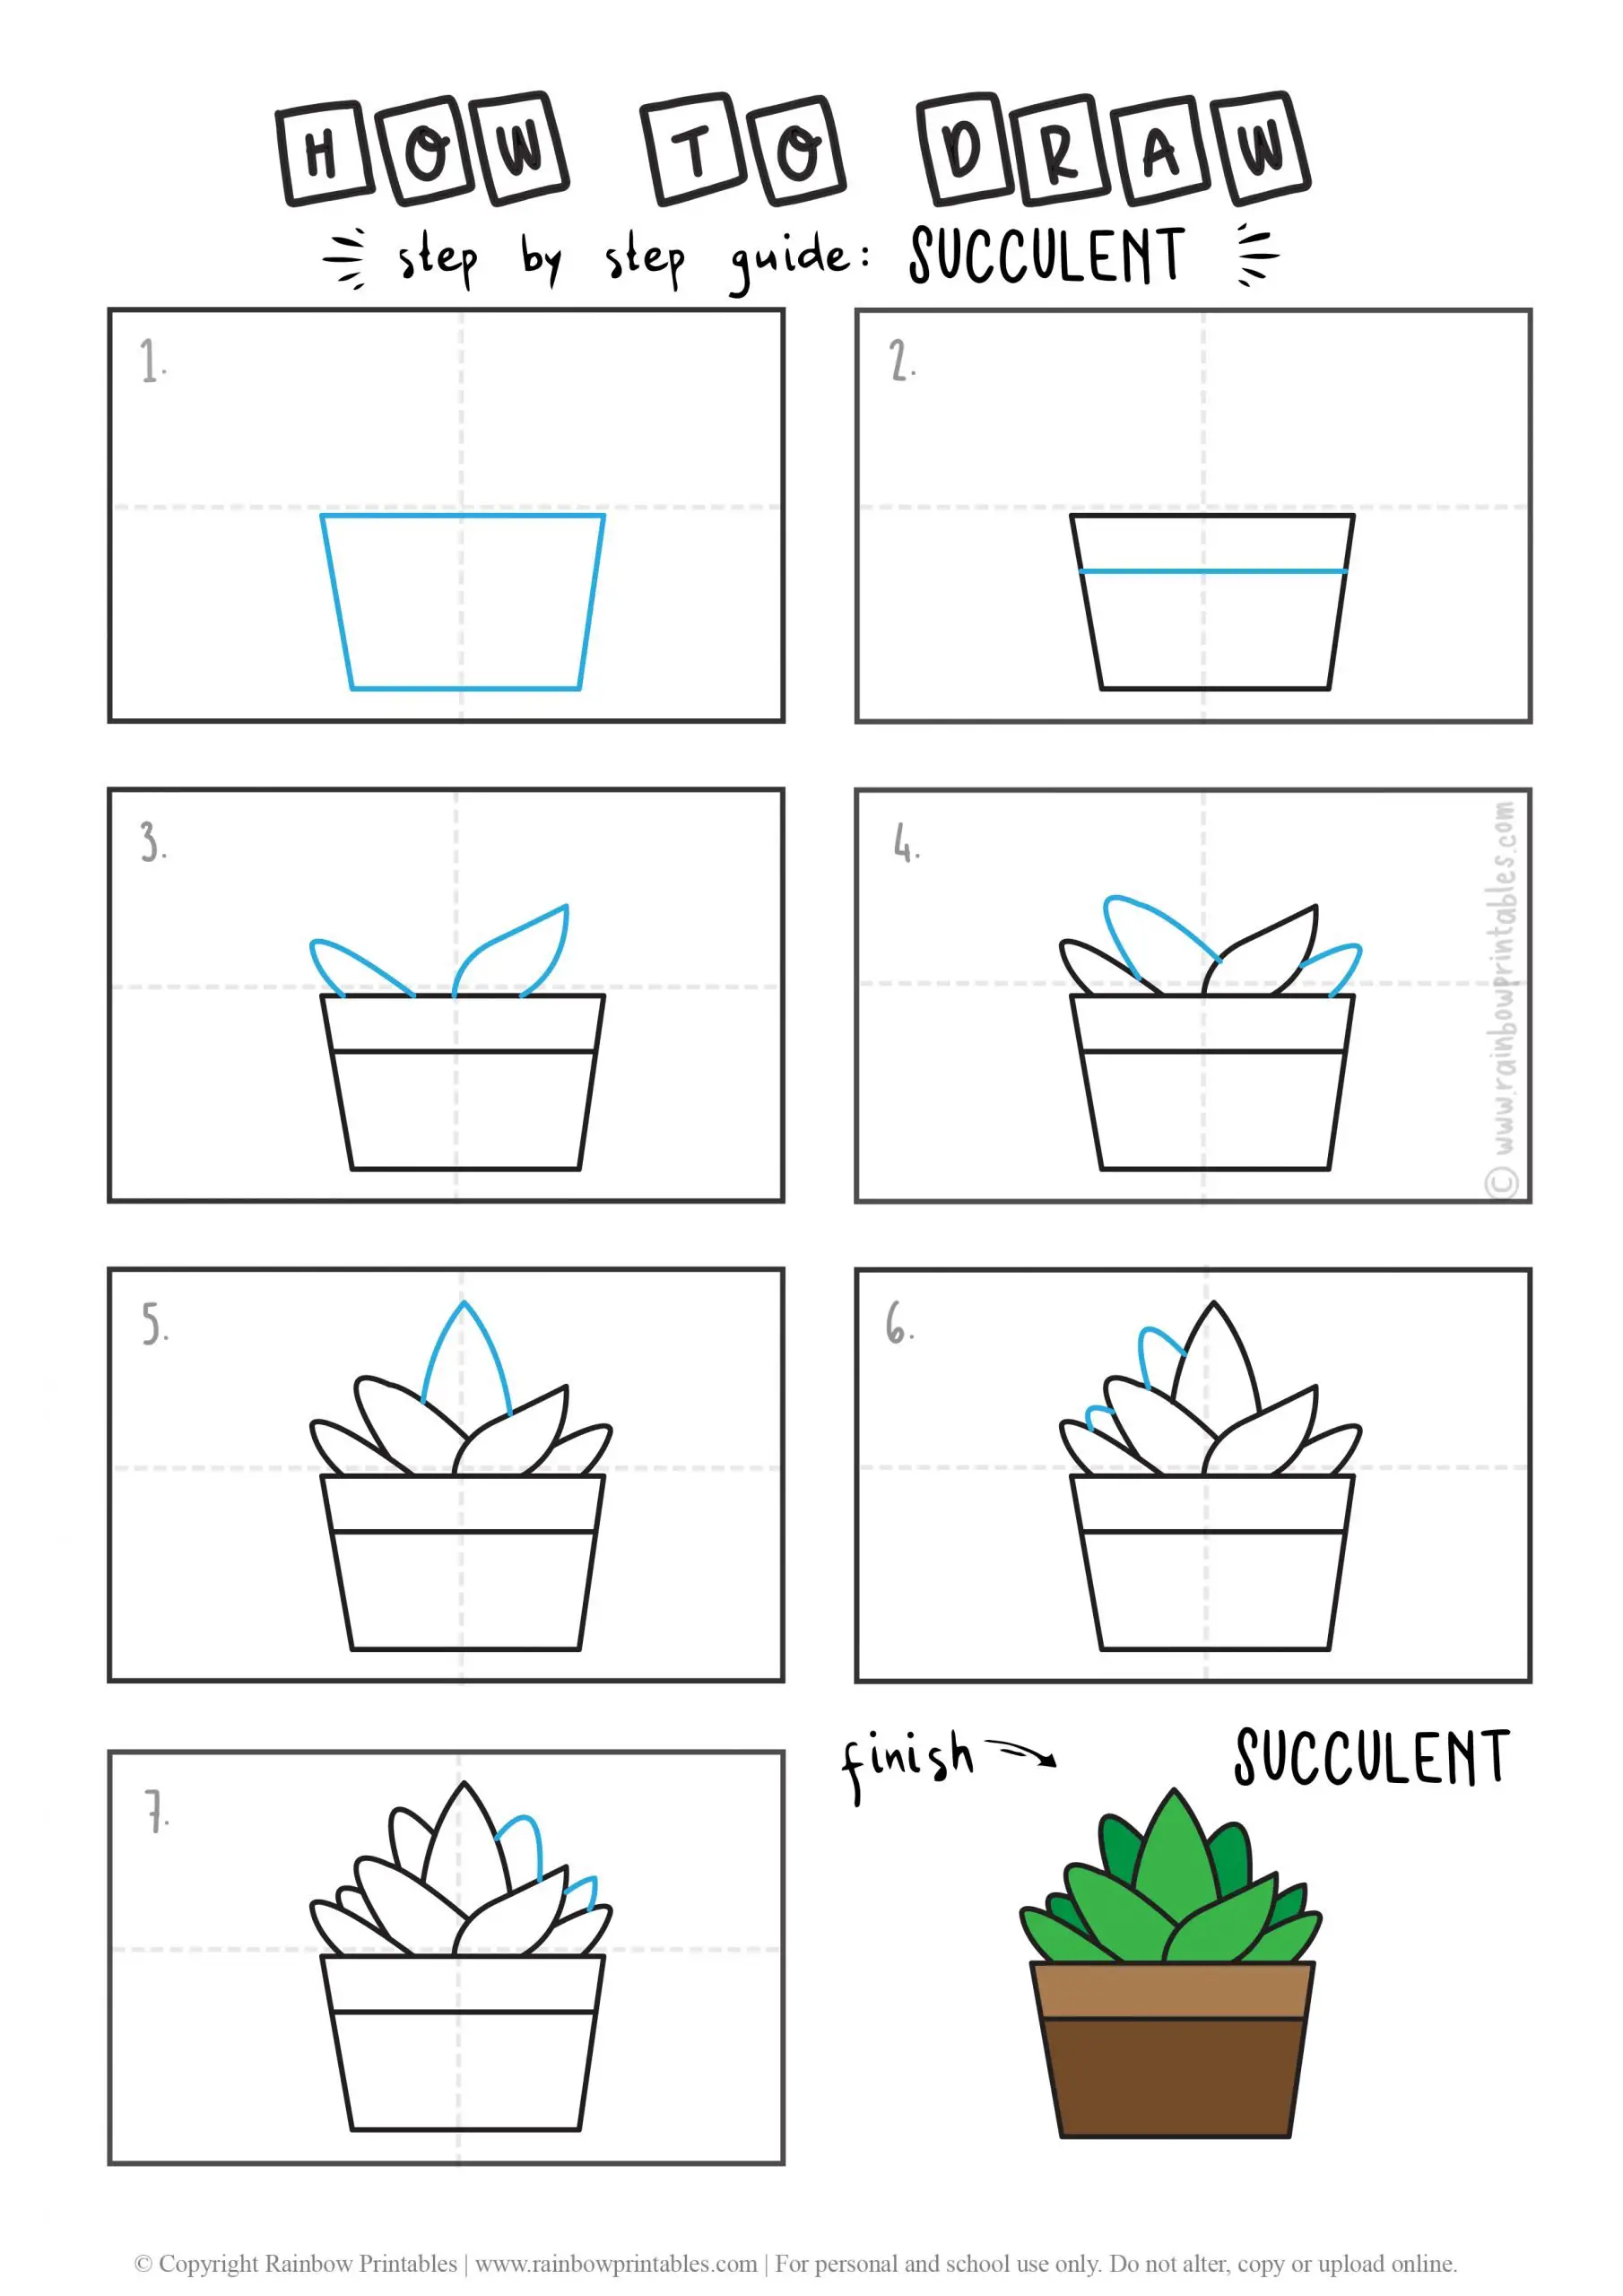 HOW TO DRAW A SUCCULENT PLANT CACTUS FLOWER GUIDE ILLUSTRATION STEP BY STEP EASY SIMPLE FOR KIDS